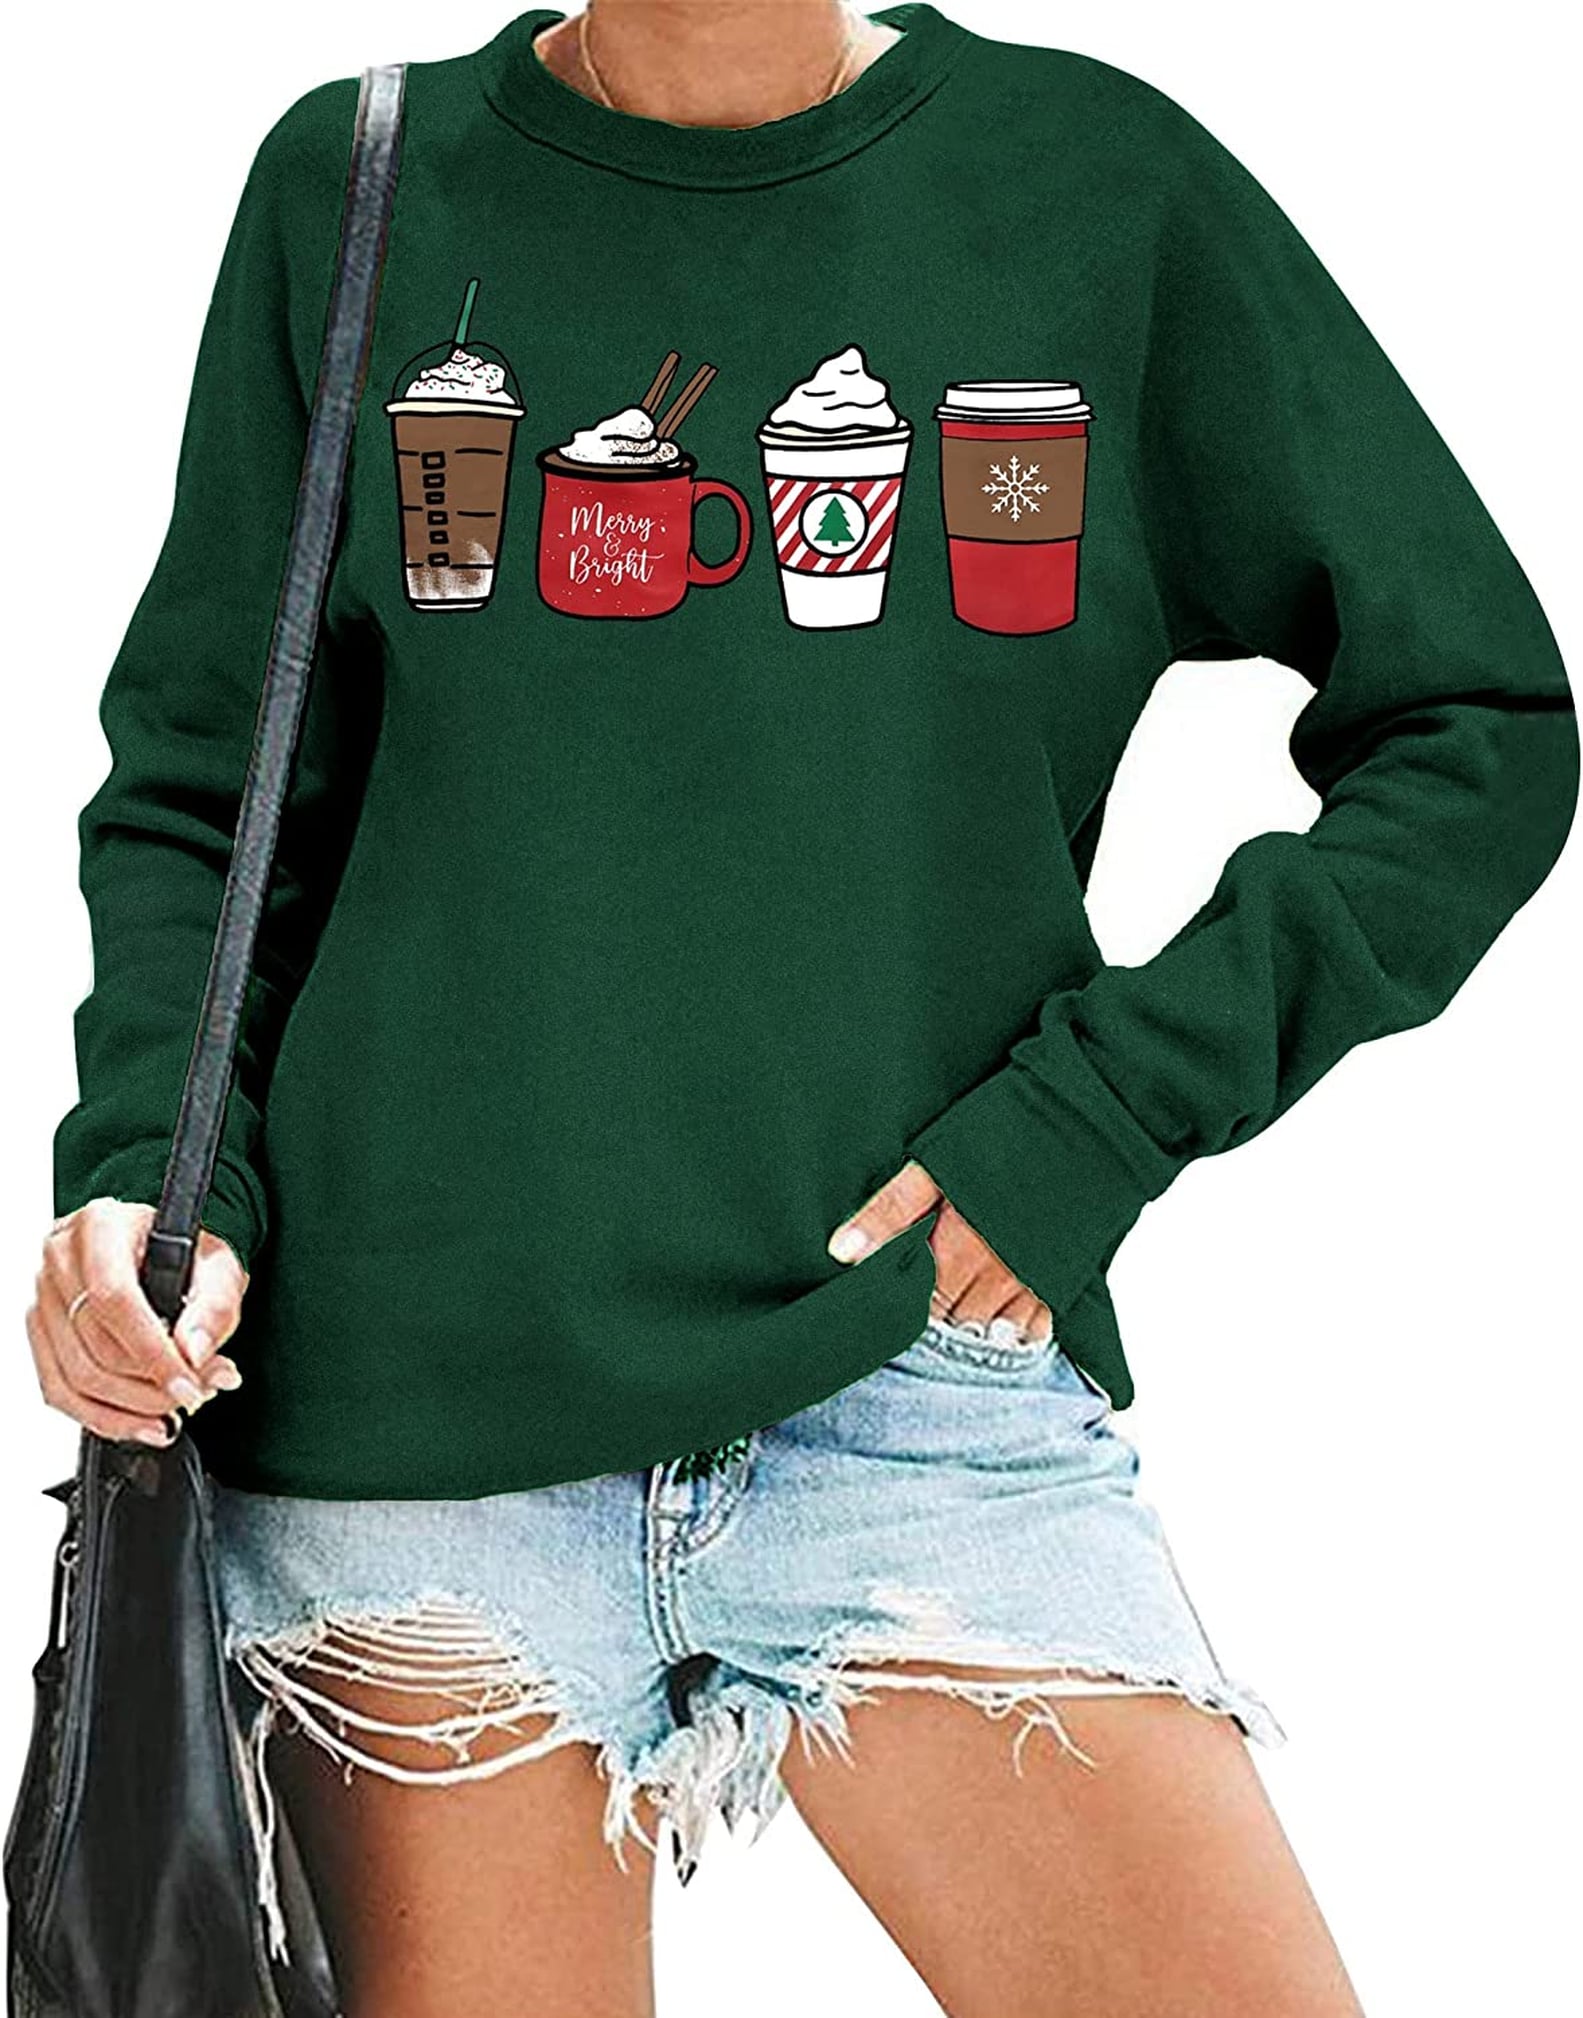 The Best Ugly Christmas Sweaters of 2022 | POPSUGAR Fashion